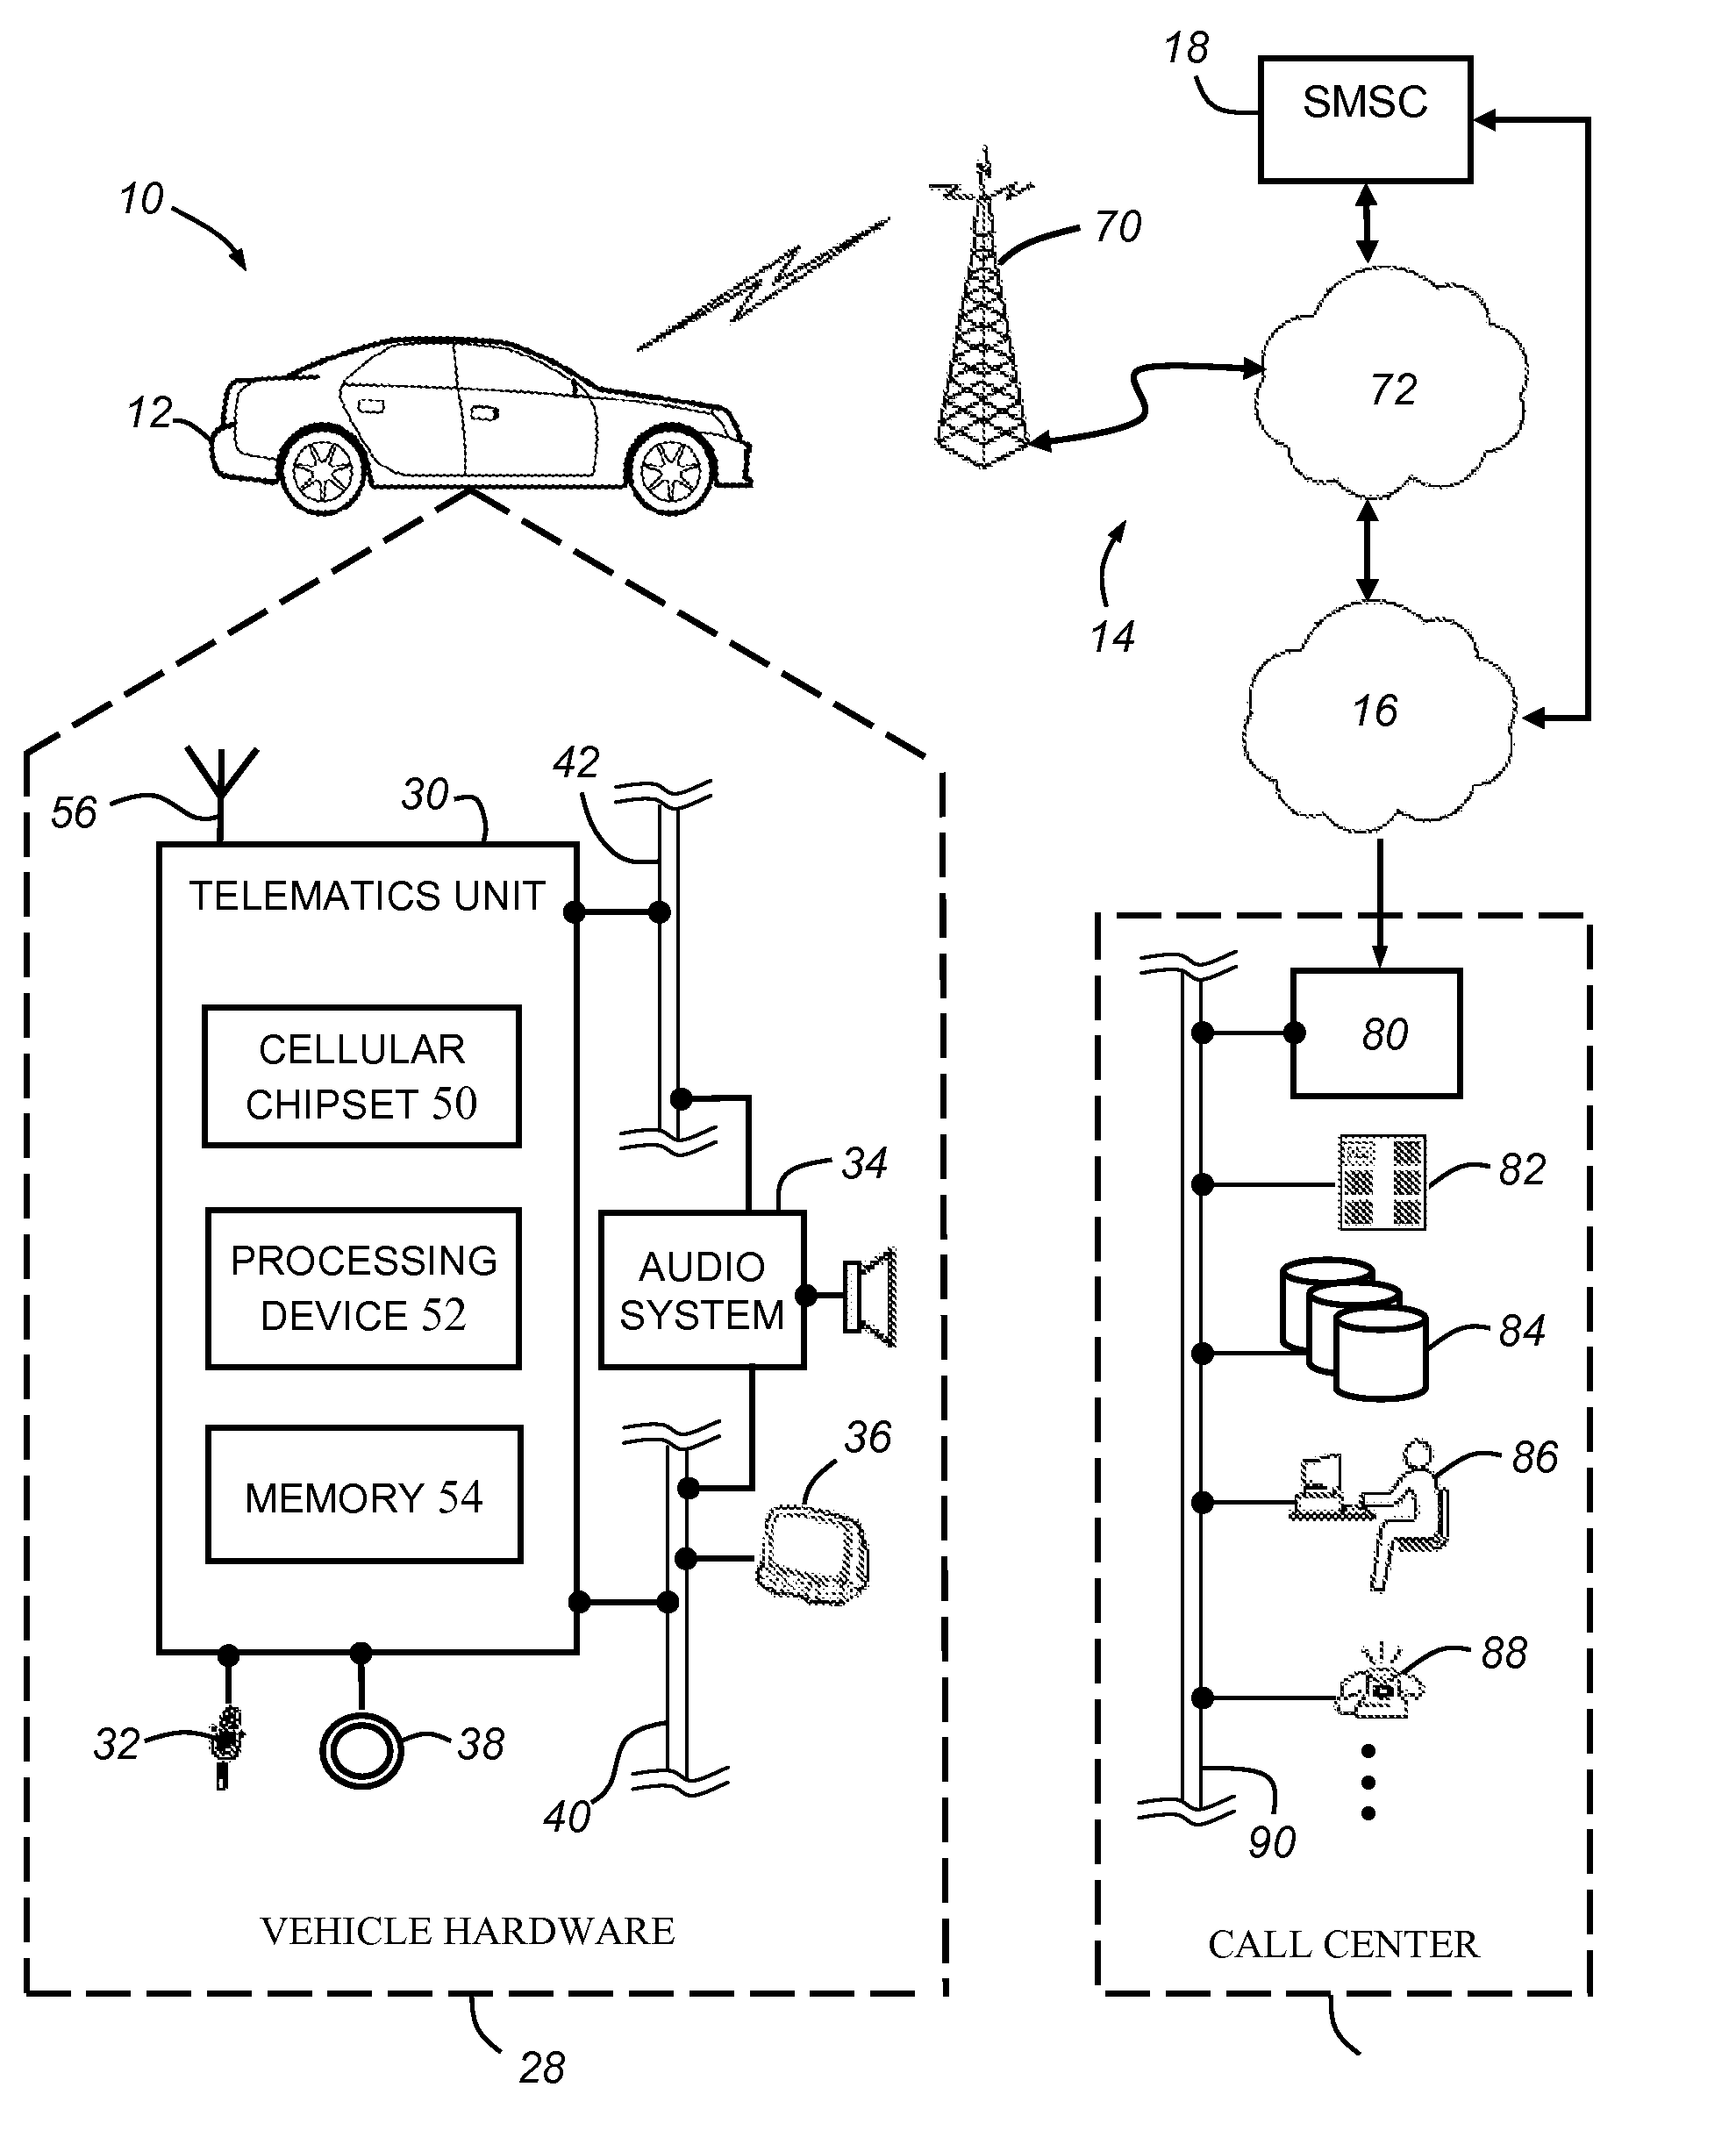 Method of authenticating a short message service (SMS) message